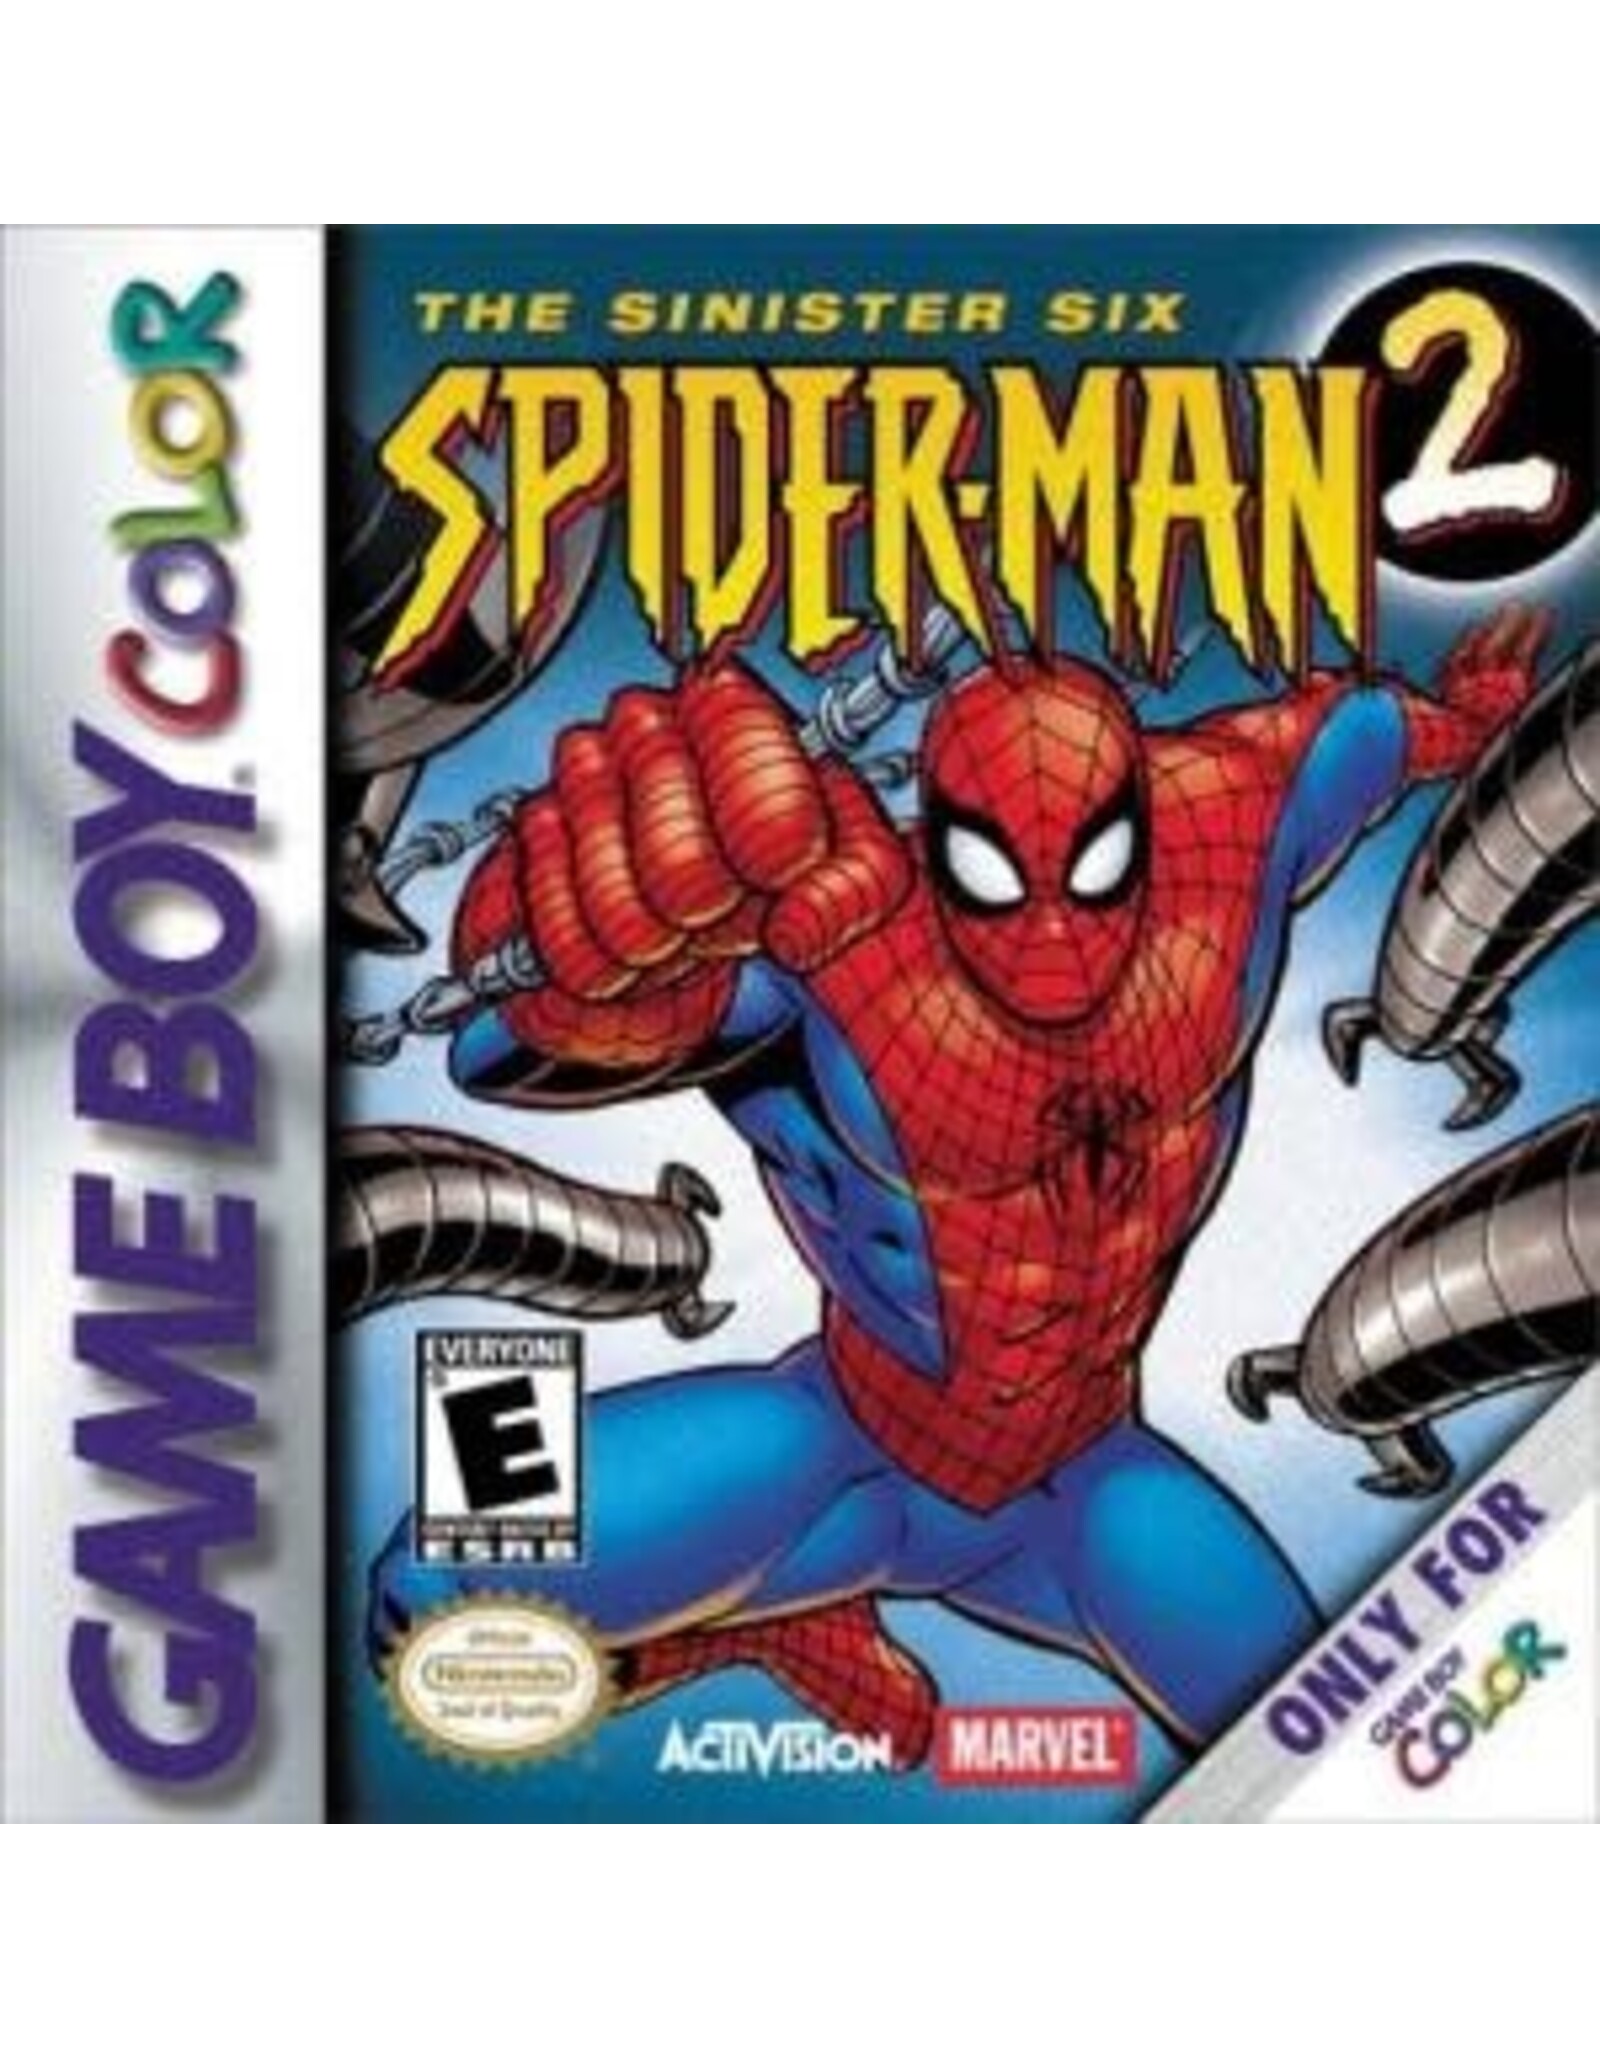 Game Boy Color Spider-Man 2 The Sinister Six (CiB)